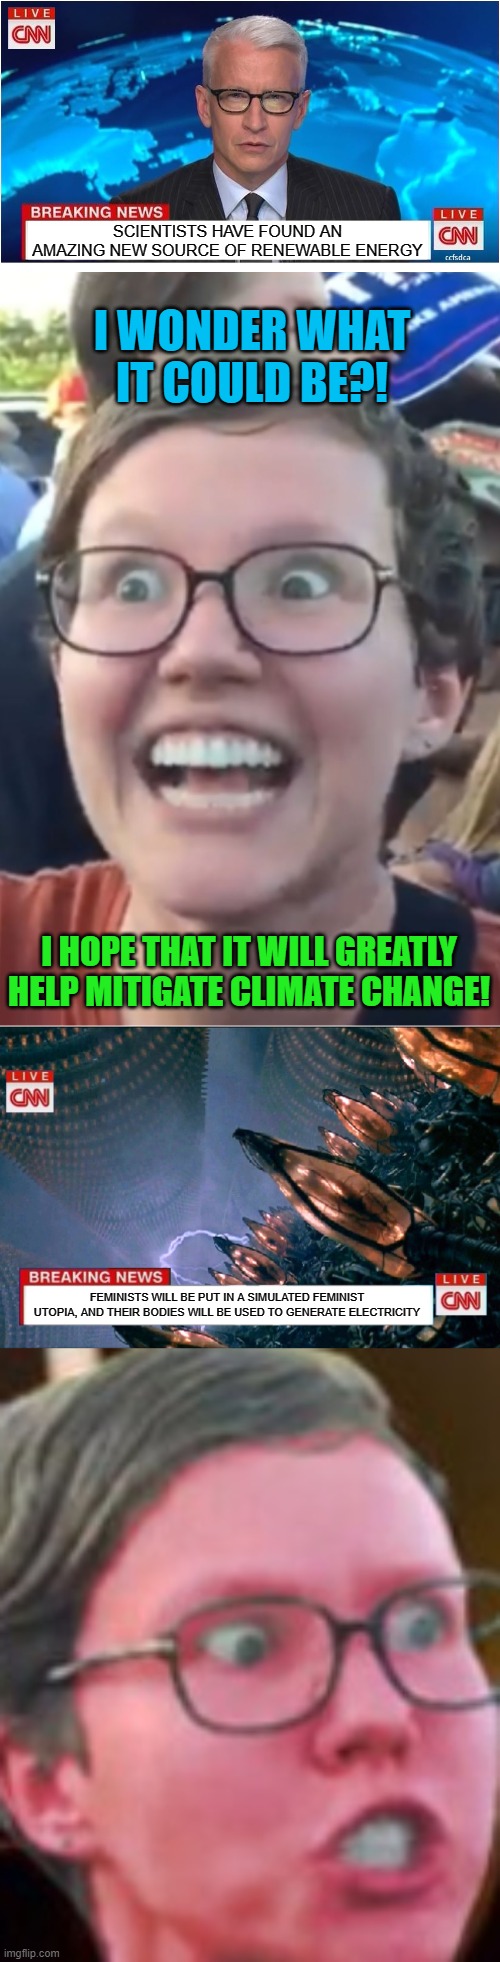 SCIENTISTS HAVE FOUND AN AMAZING NEW SOURCE OF RENEWABLE ENERGY; I WONDER WHAT IT COULD BE?! I HOPE THAT IT WILL GREATLY HELP MITIGATE CLIMATE CHANGE! FEMINISTS WILL BE PUT IN A SIMULATED FEMINIST UTOPIA, AND THEIR BODIES WILL BE USED TO GENERATE ELECTRICITY | image tagged in breaking news,renewable energy,feminist,electricity,the matrix,memes | made w/ Imgflip meme maker